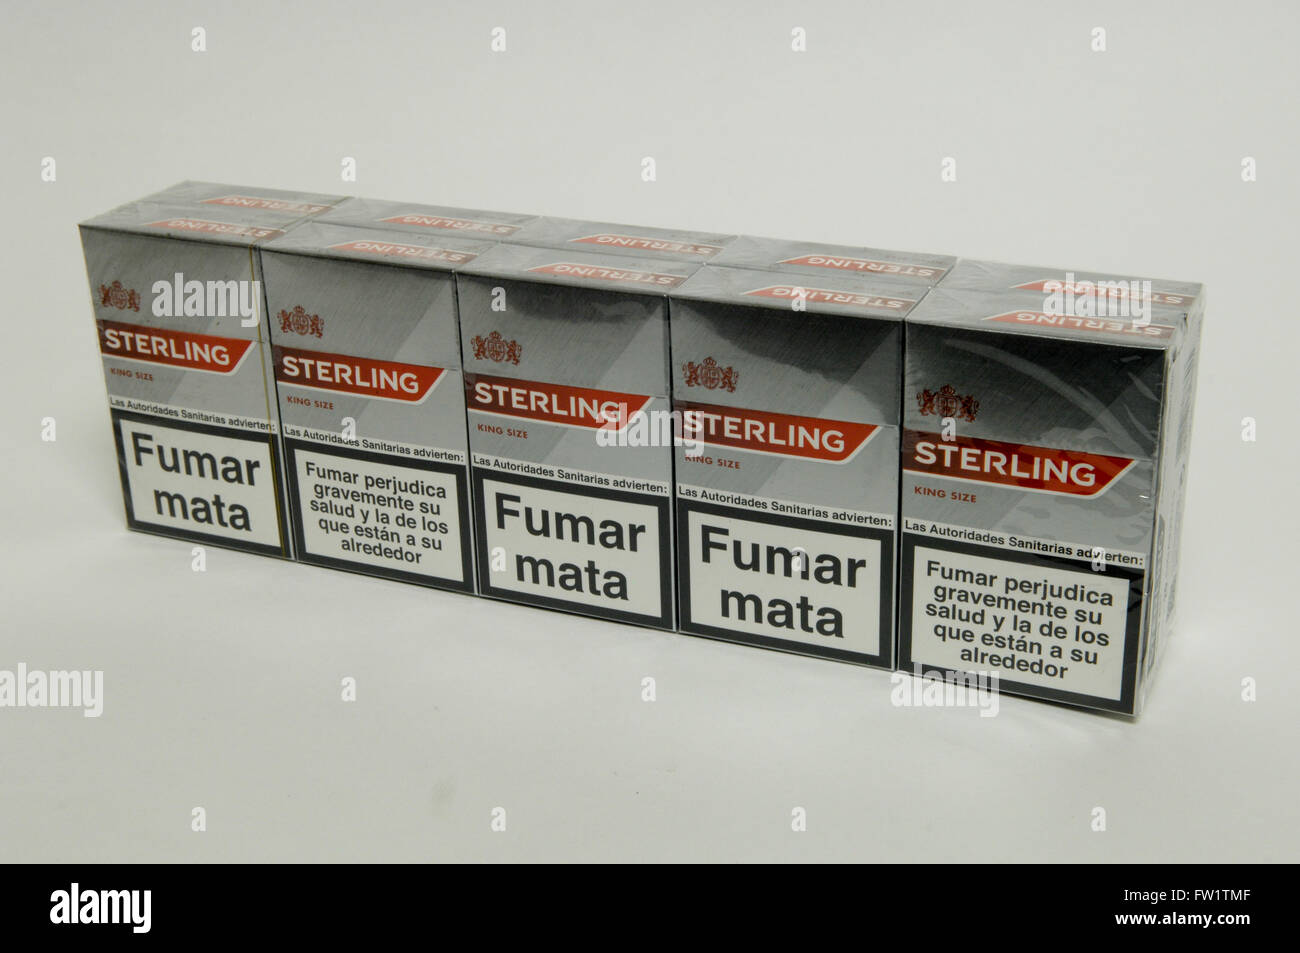 Carton of Sterling Cigarettes on white background Stock Photo